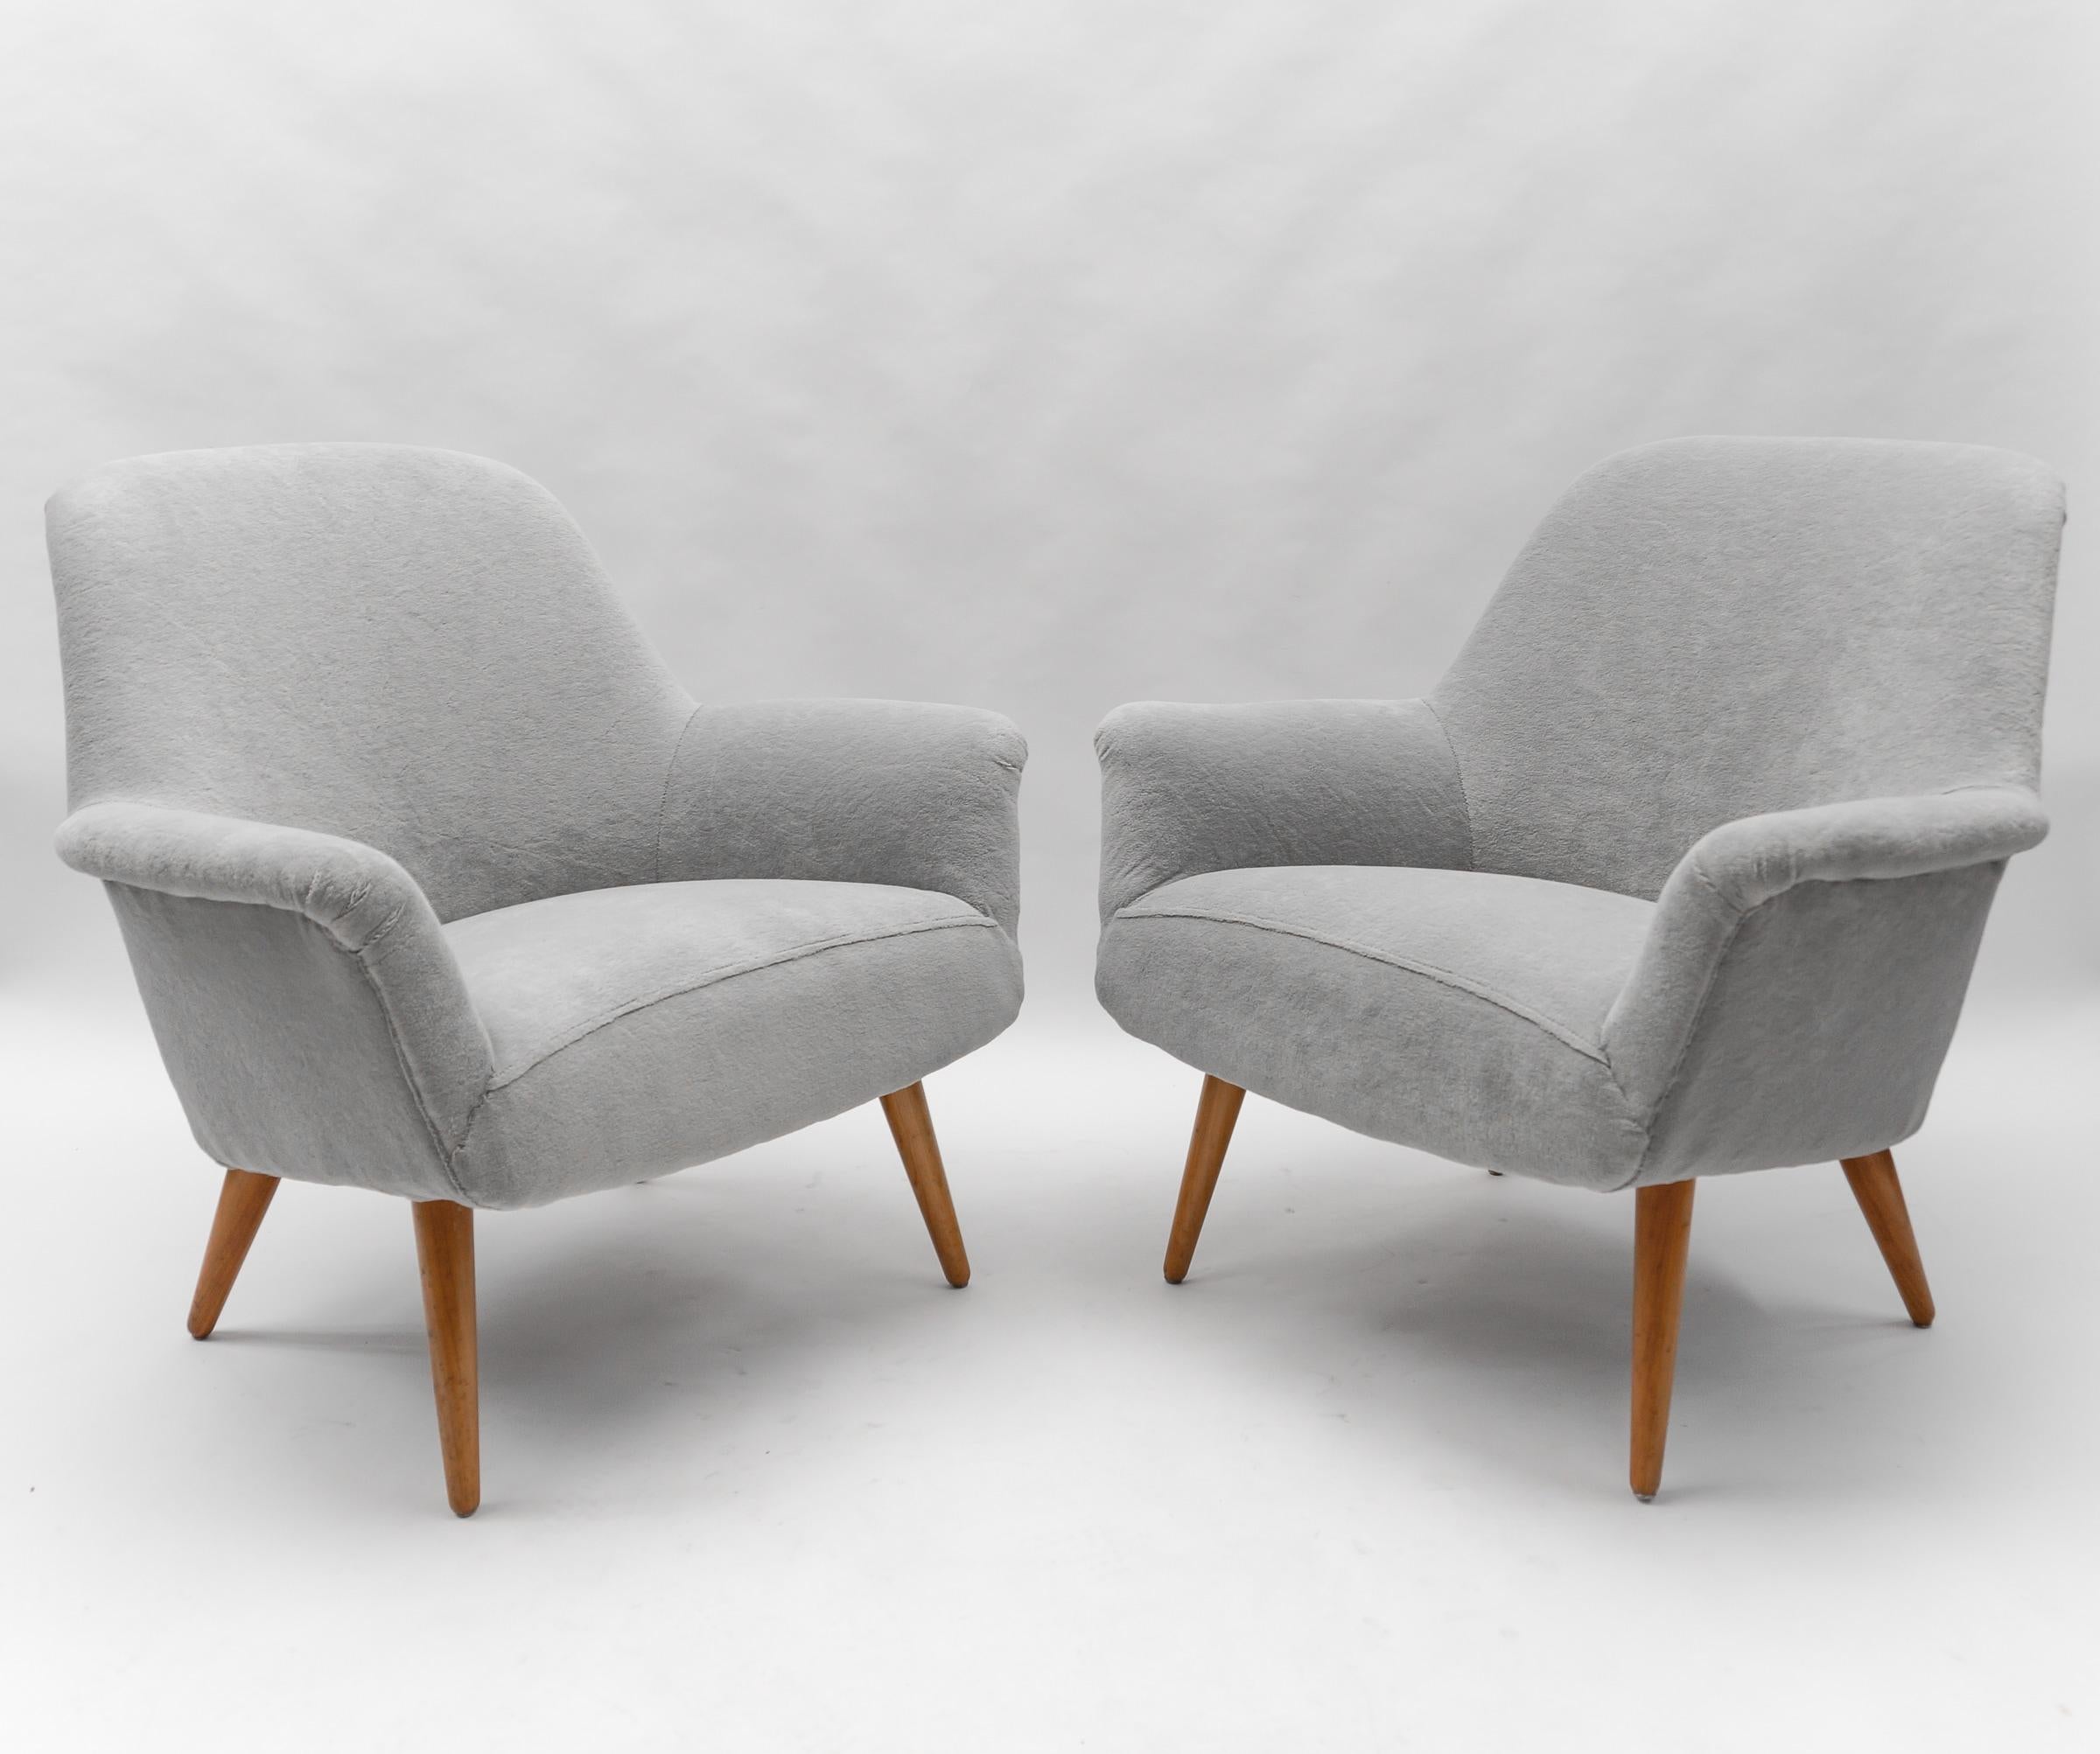  Mid-Century Armchairs in Teddy Fabric, 1950s, Set of 2 For Sale 12